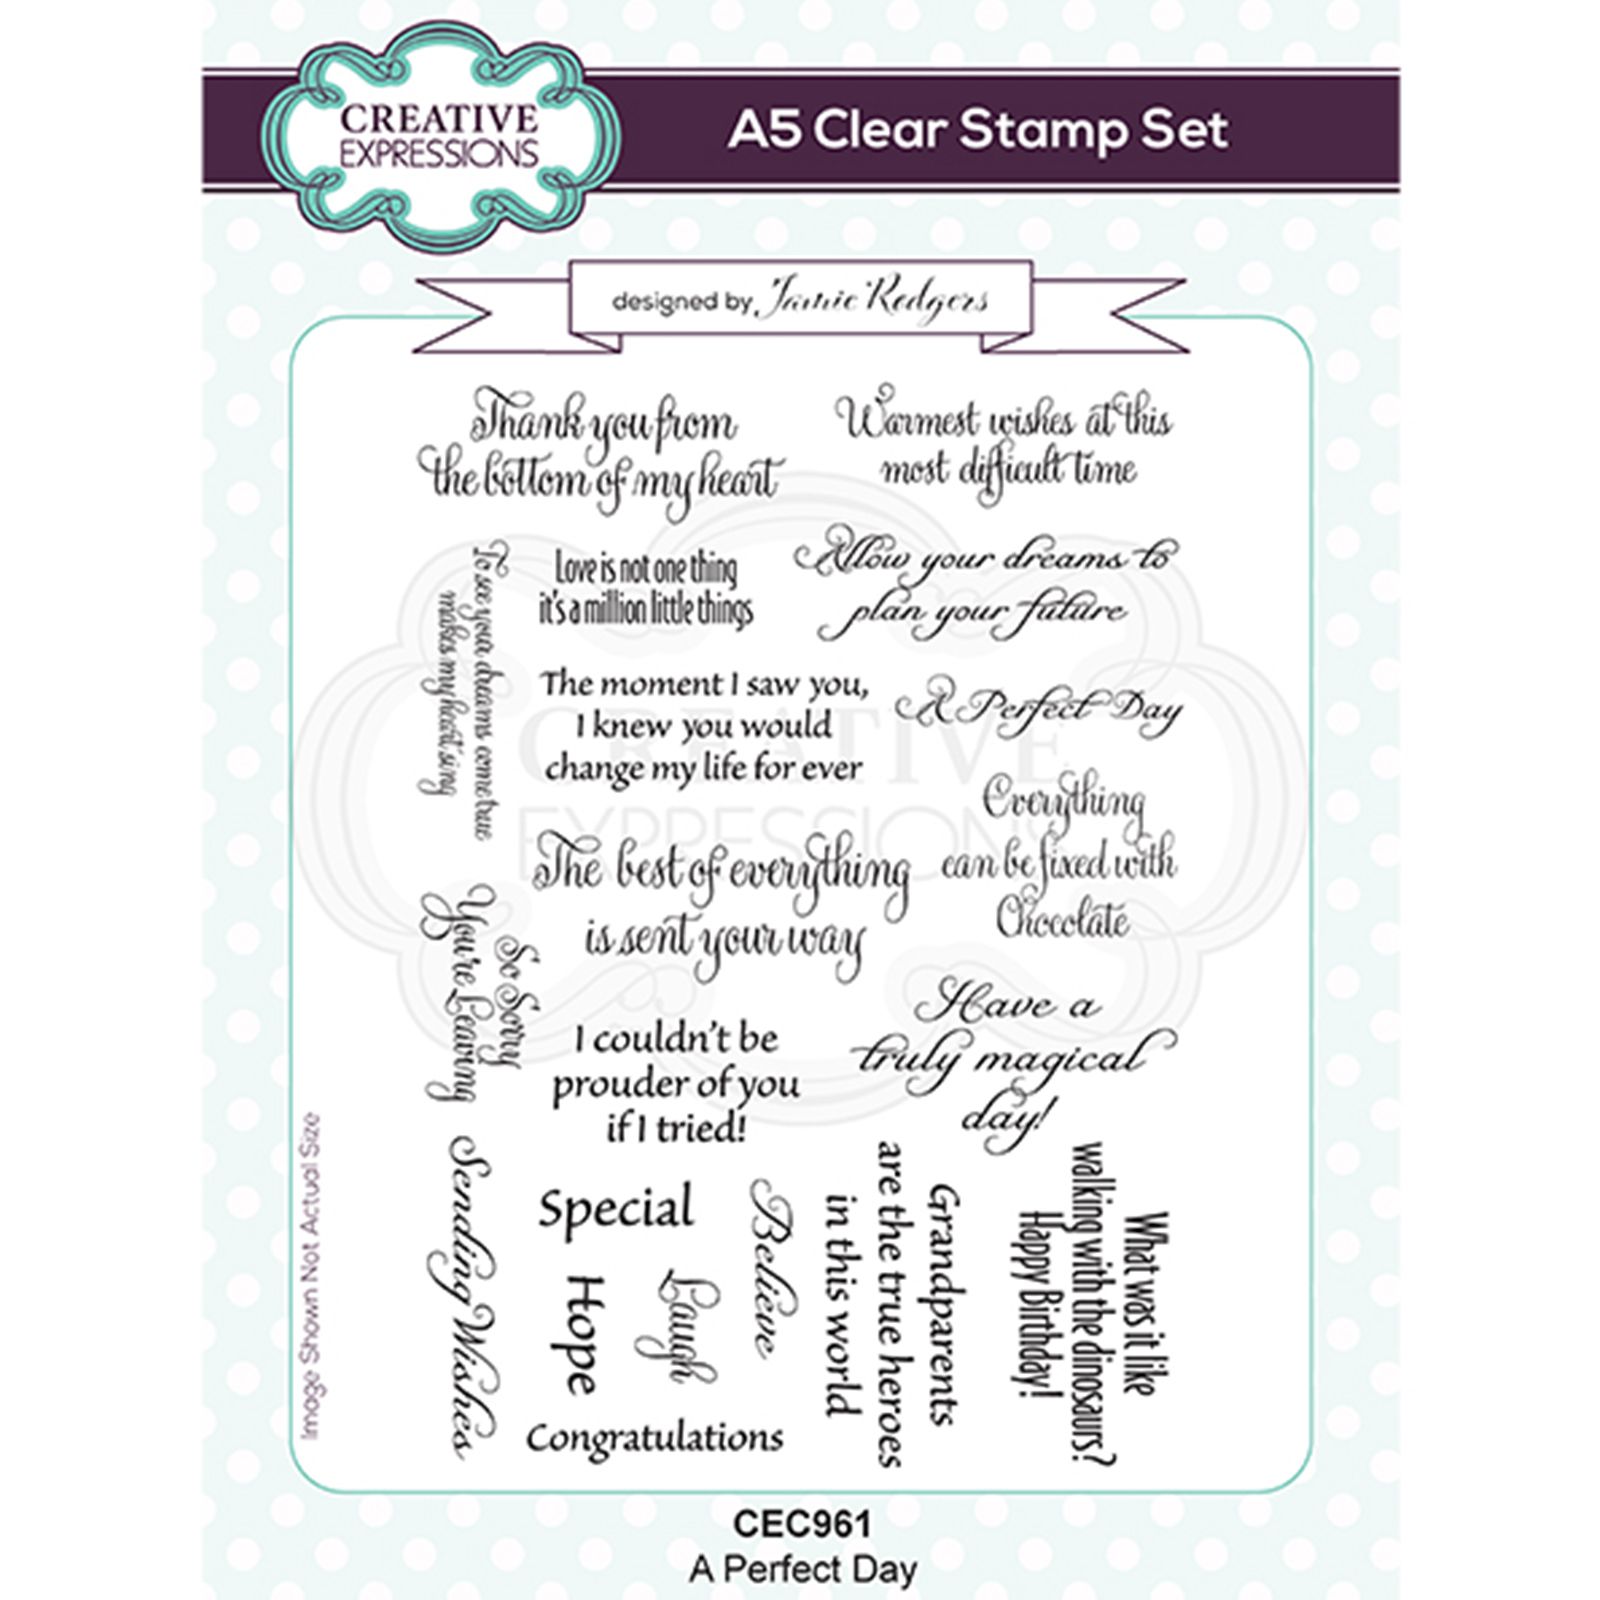 Creative Clear Rubber Stamps for Crafting